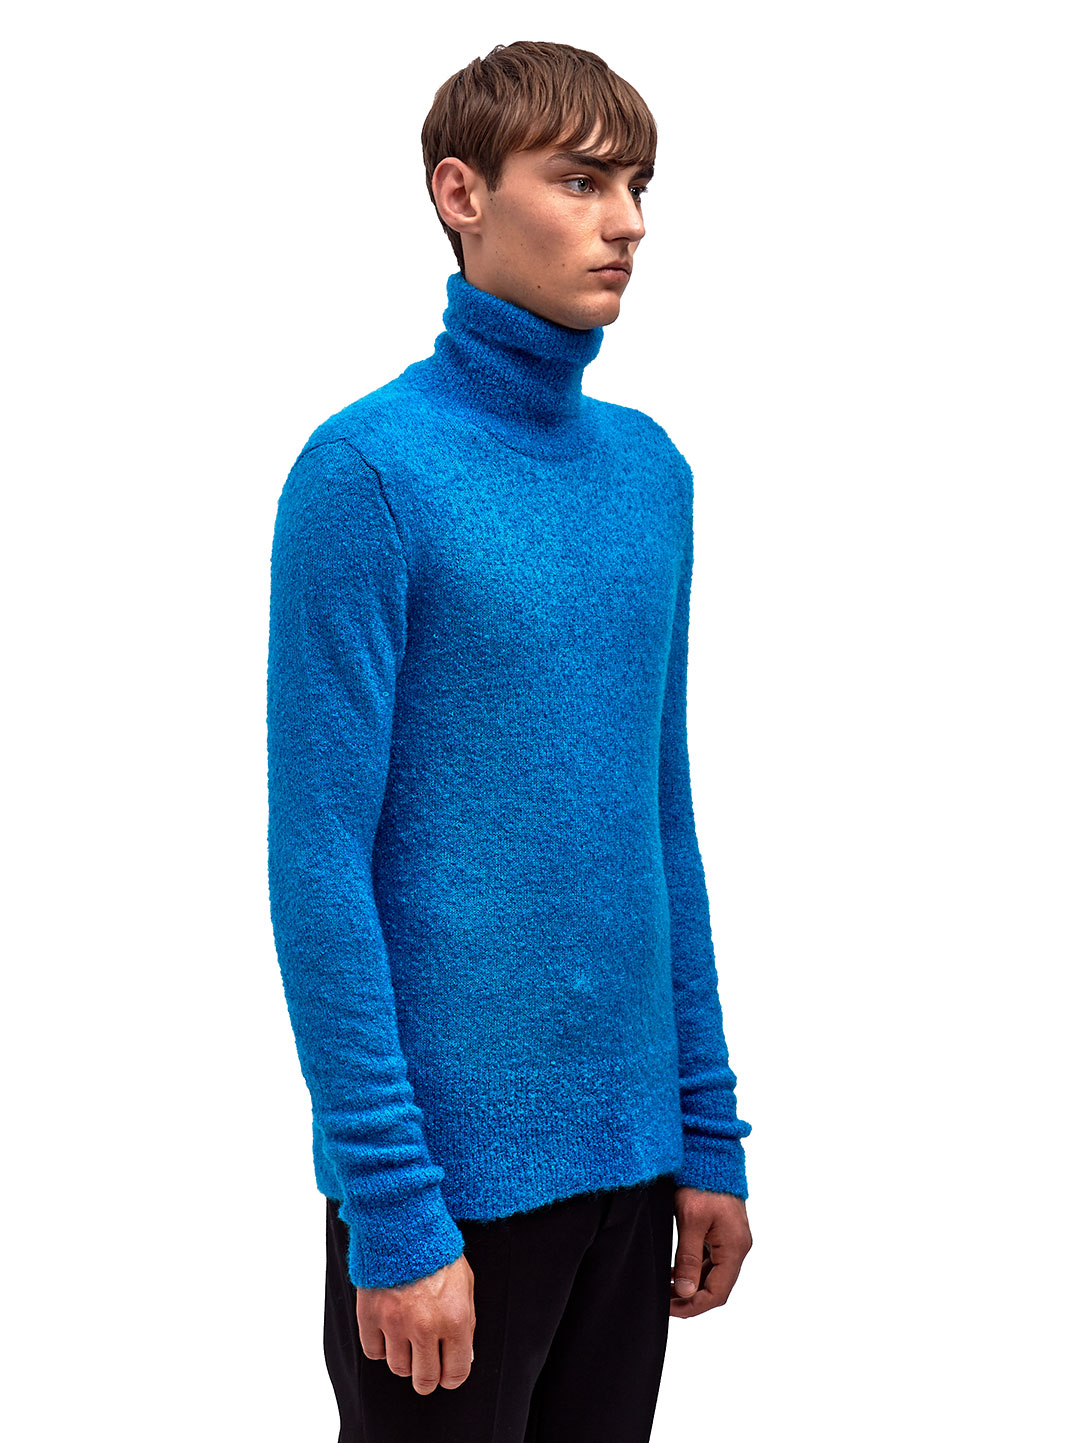 Lyst - Raf simons / Sterling Ruby Mens Knitted Narrow Fit Roll-Neck ...